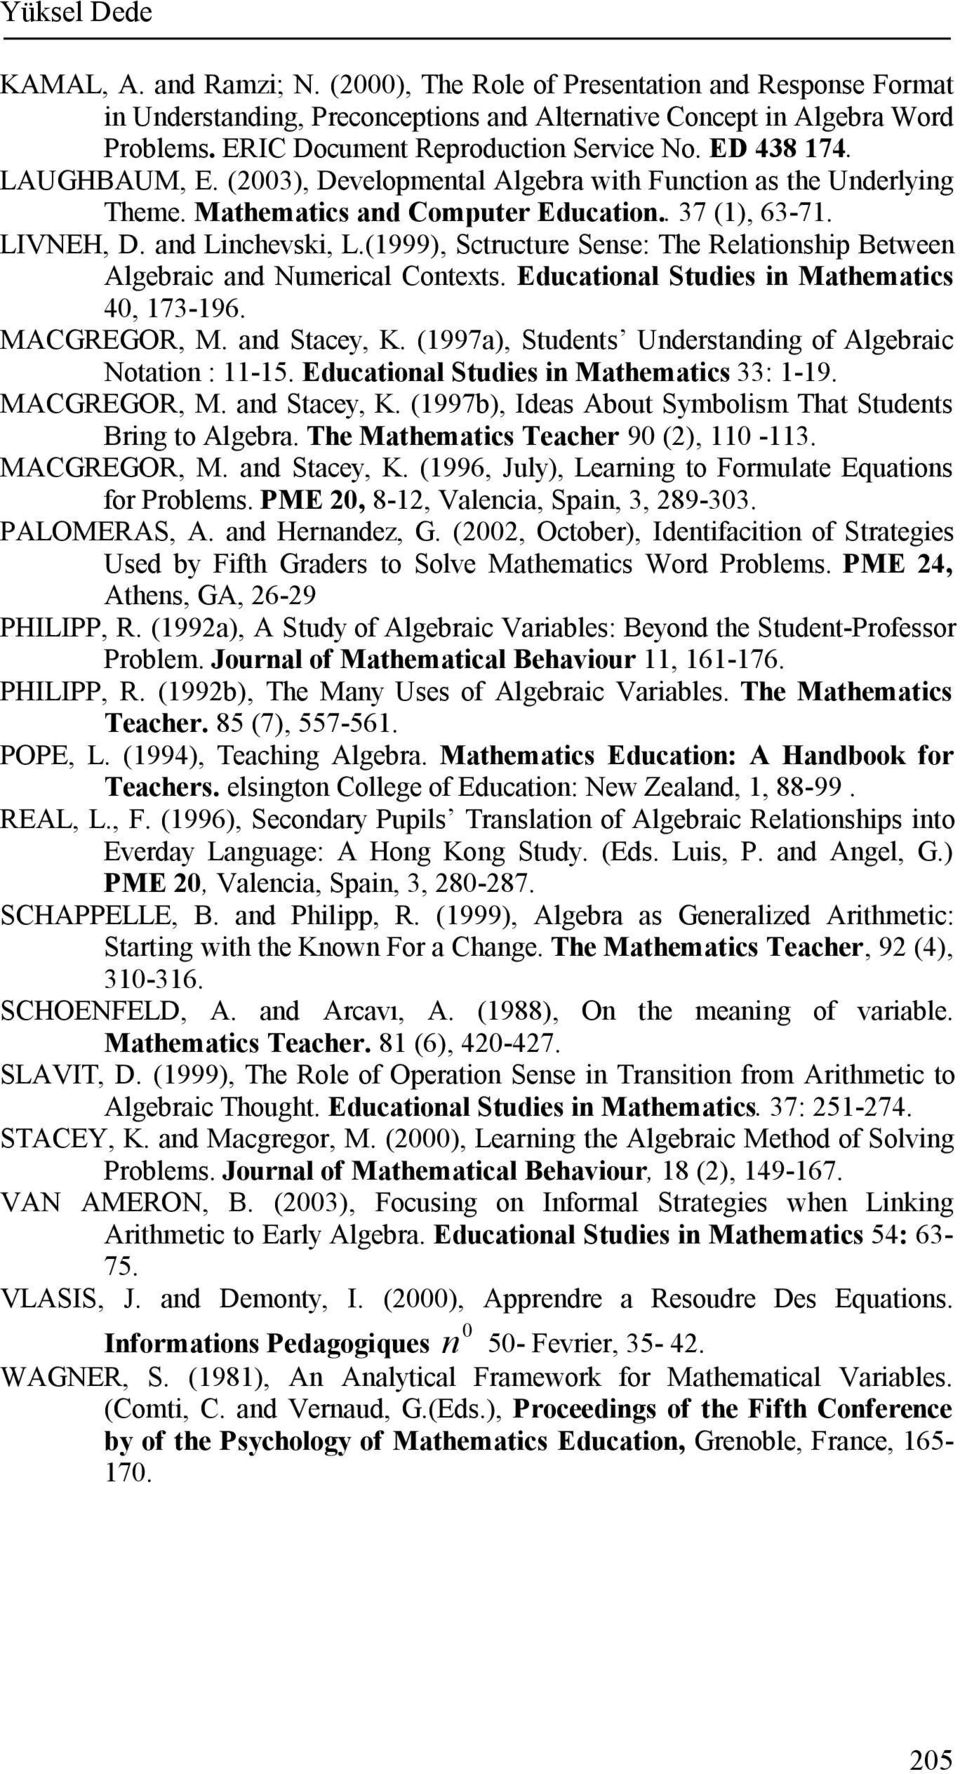 and Linchevski, L.(999), Sctructure Sense: The Relationship Between Algebraic and Numerical Contexts. Educational Studies in Mathematics 0, 79. MACGREGOR, M. and Stacey, K.